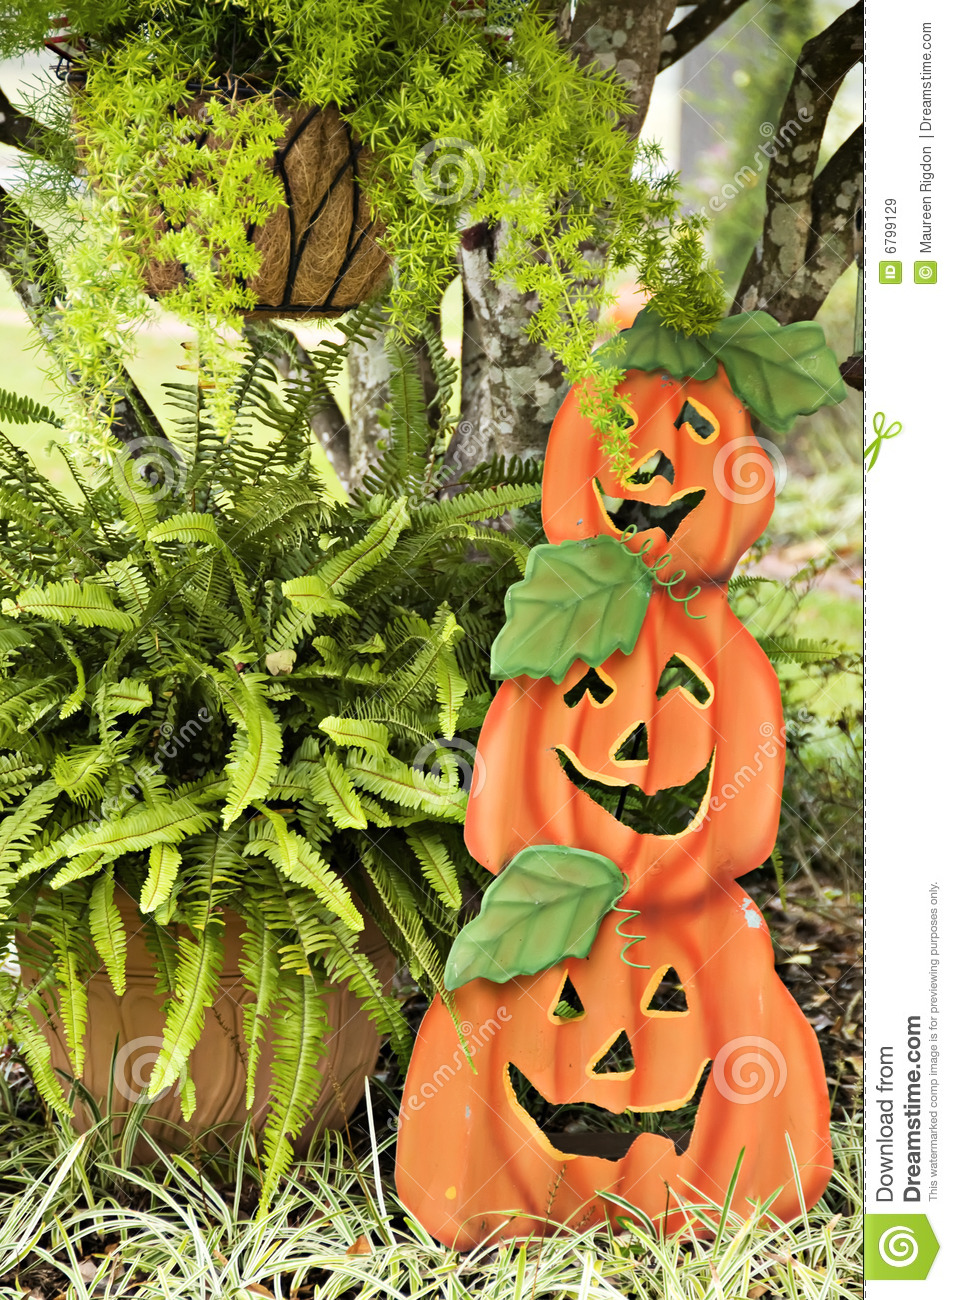 Stacked Pumpkins Royalty Free Stock Images   Image  6799129